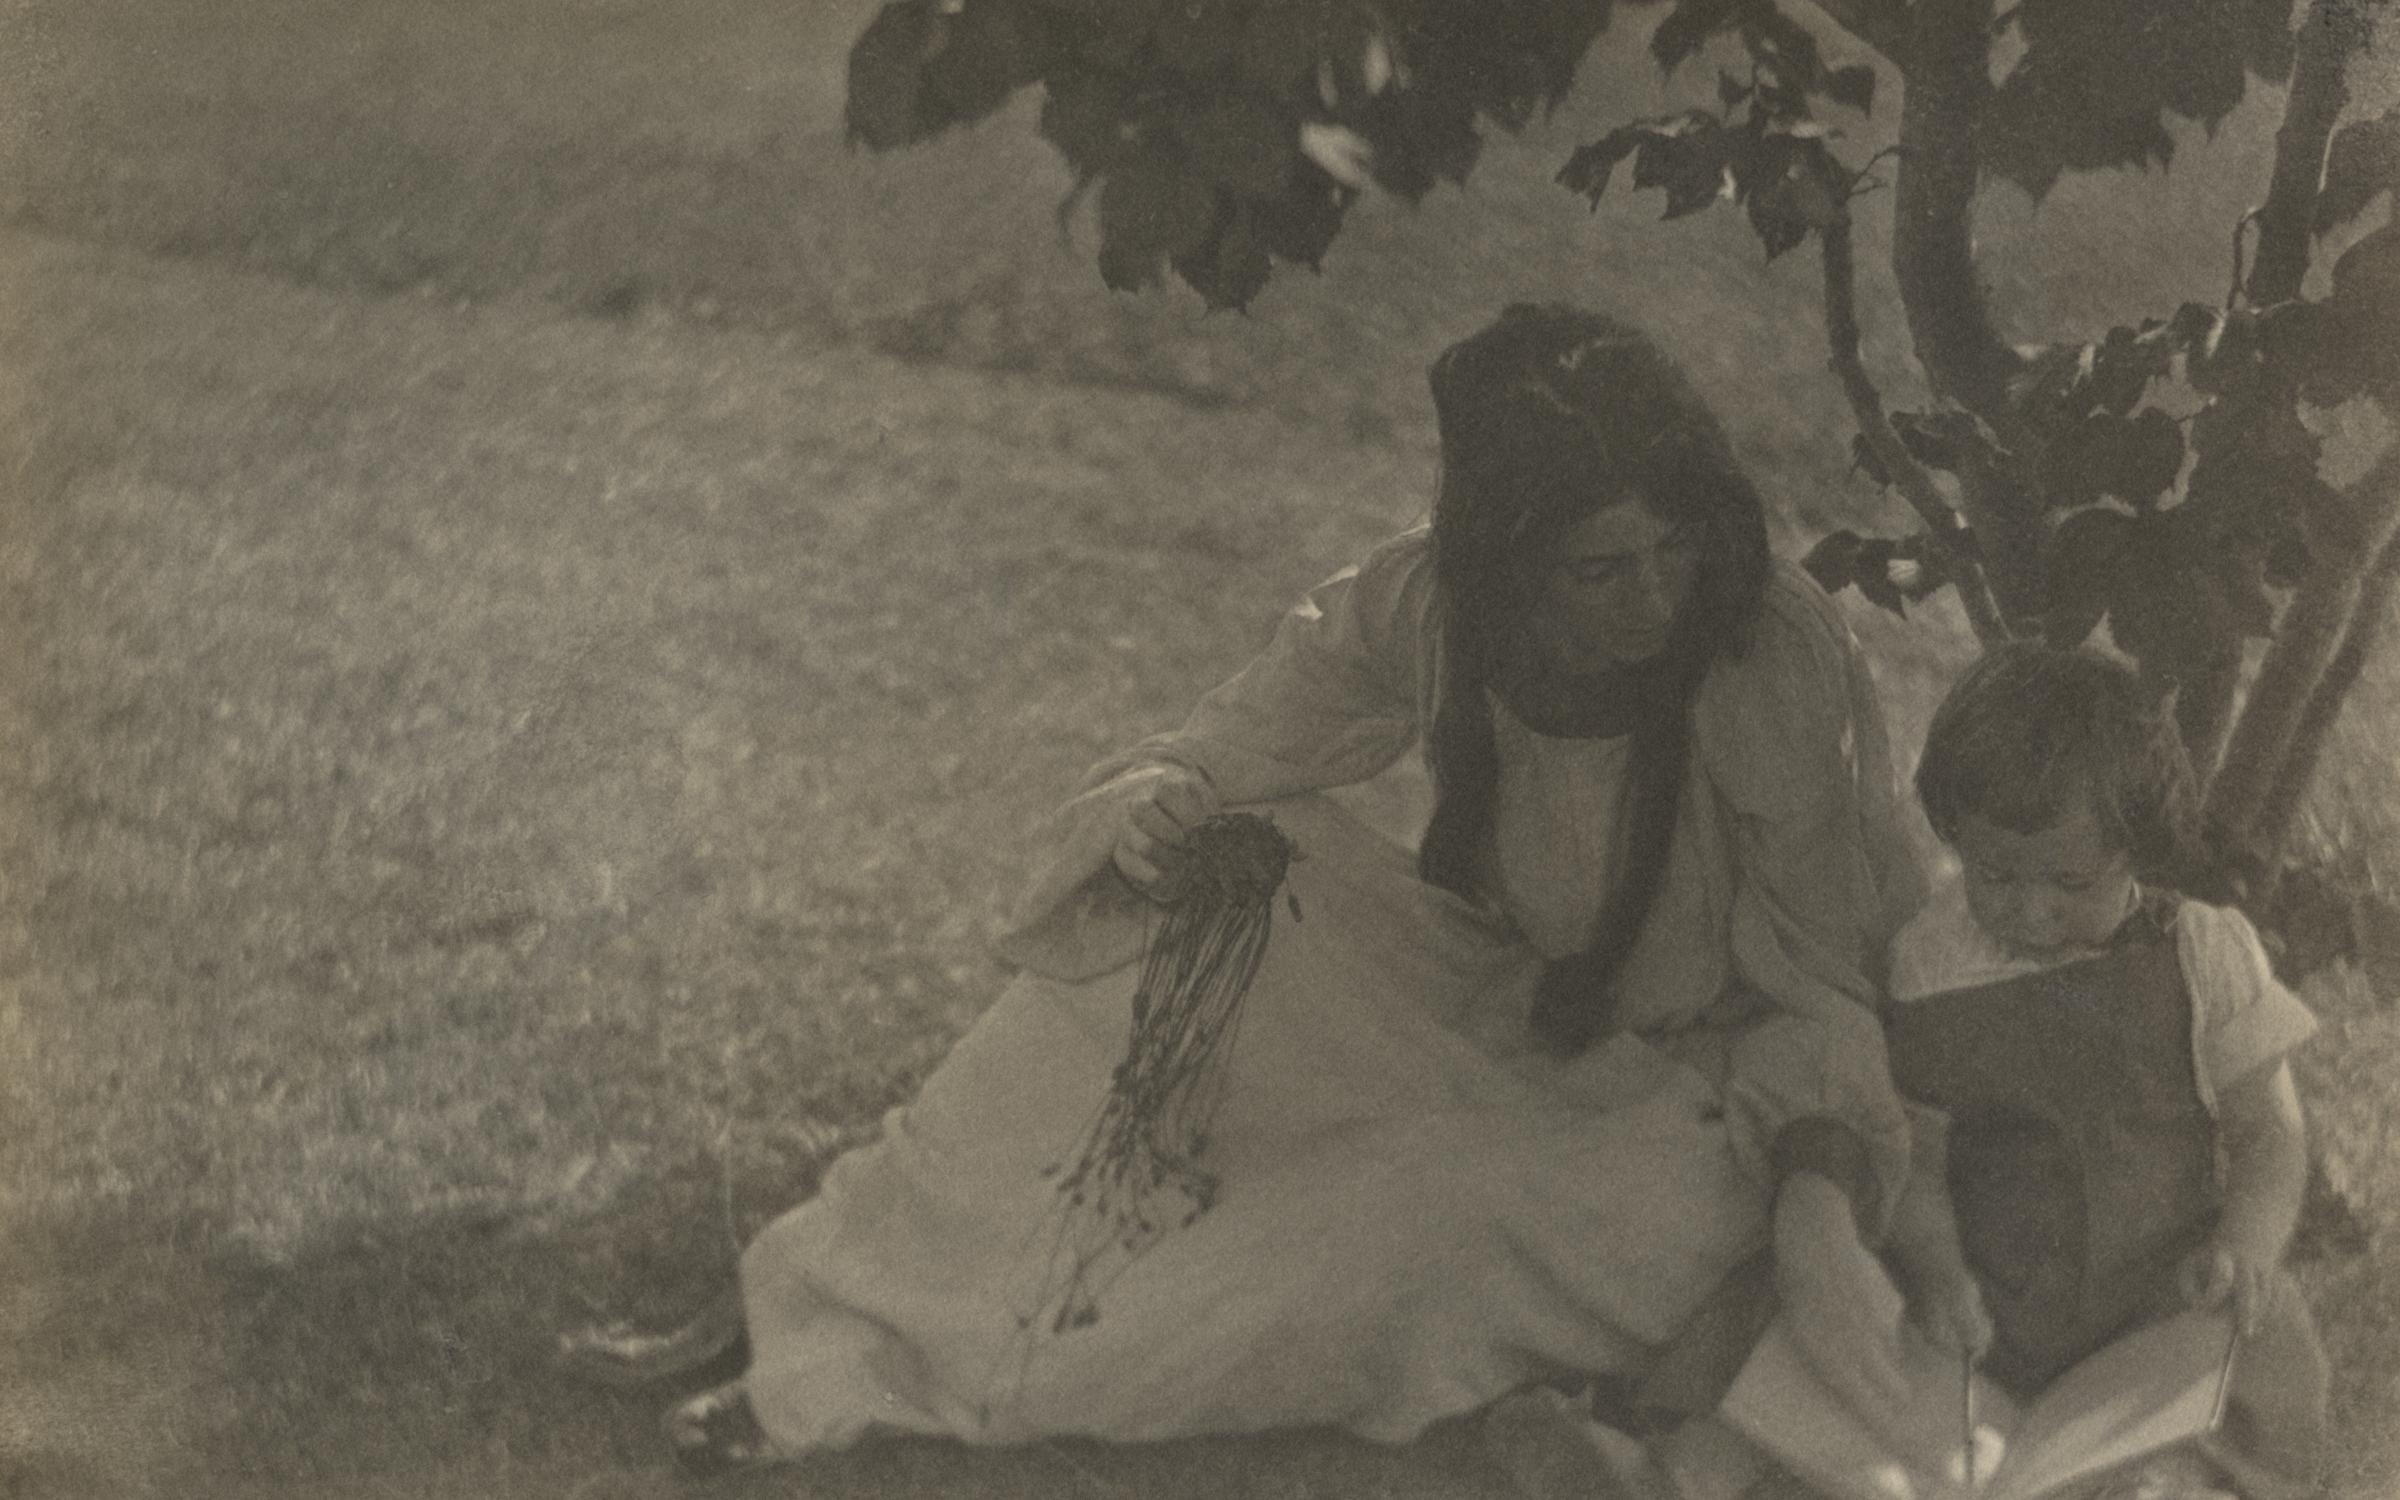 A black and white photo of a woman in a white dress sitting on the ground beneath a tree with a small child looking at a book.